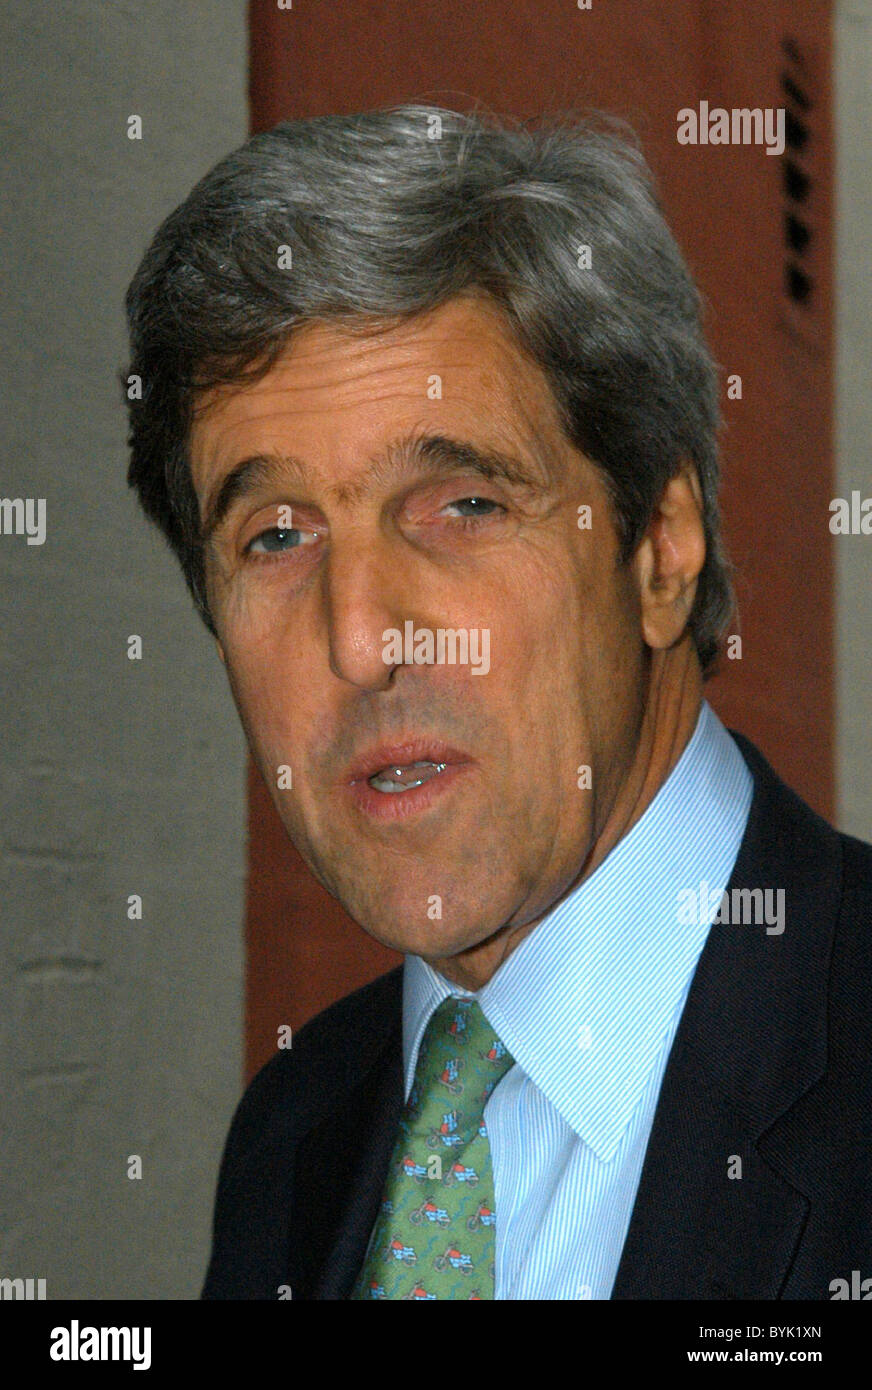 Senator John Kerry arrives for the The Colbert Report at Comedy Central Studios New York City, USA - 16.04.07 Stock Photo